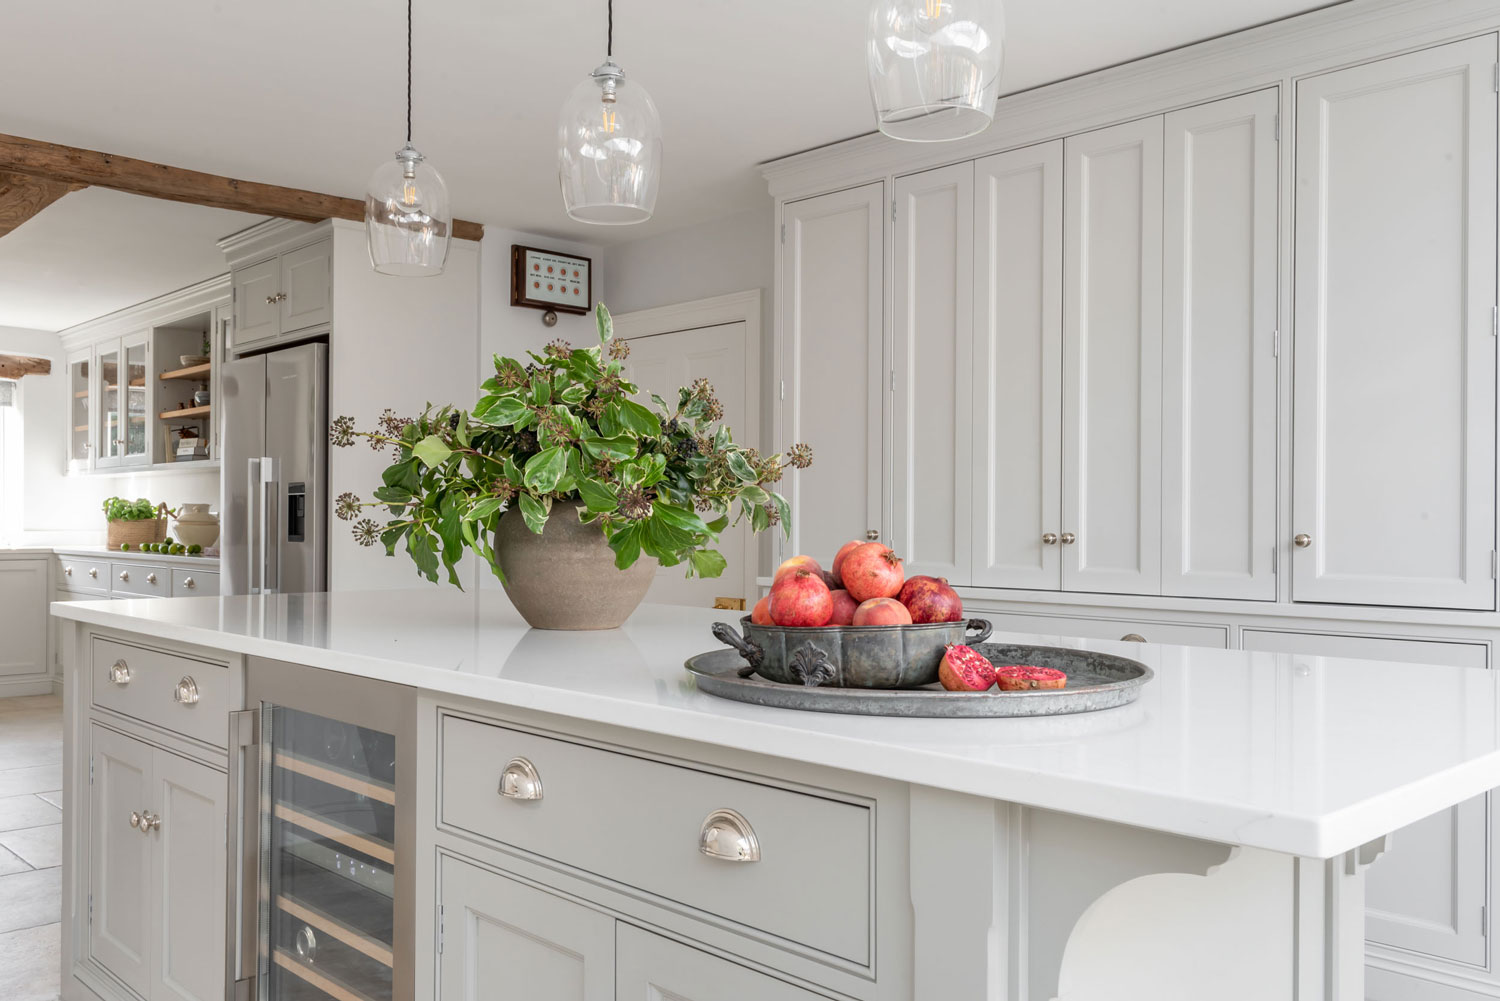 The Clandon Farm House Kitchen by Shere Kitchens - beautiful kitchens handmade in Shere Guildford Surrey